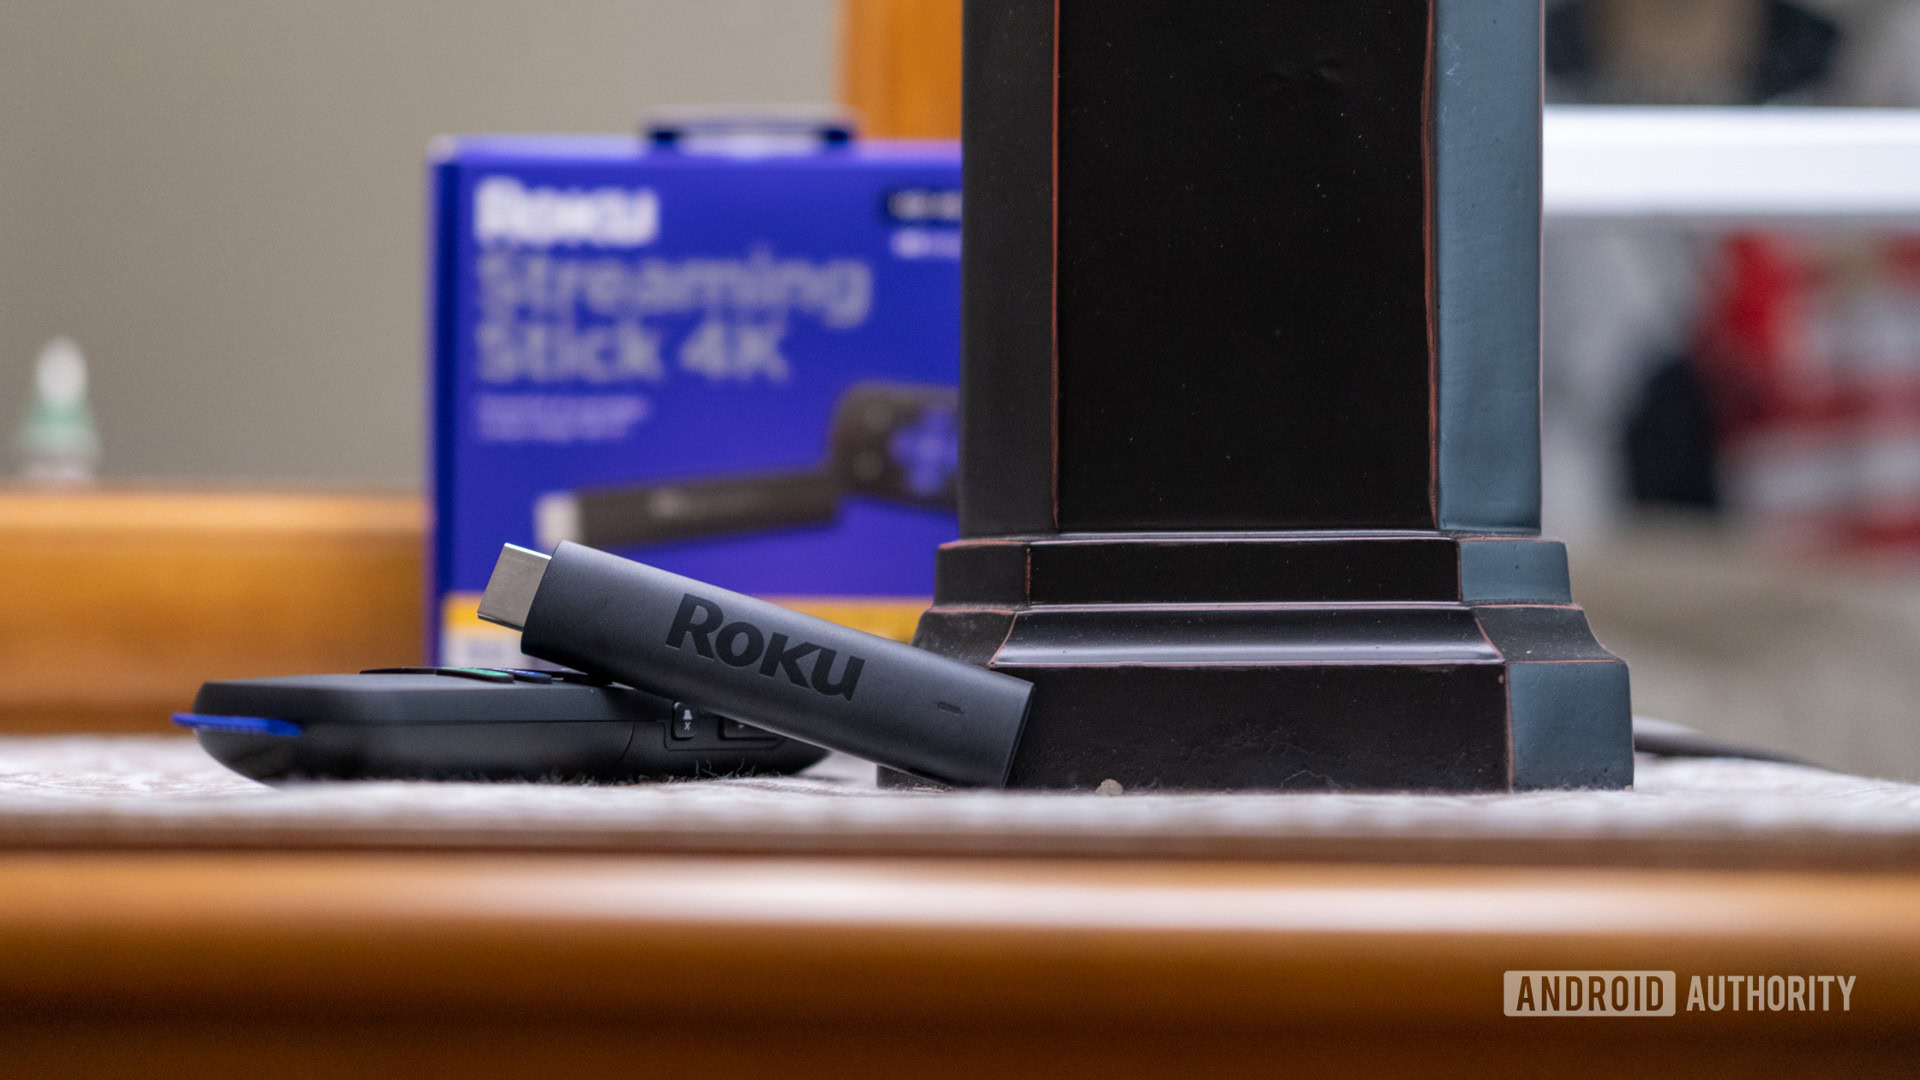 Roku Streaming Stick review: This is the only streaming device you need